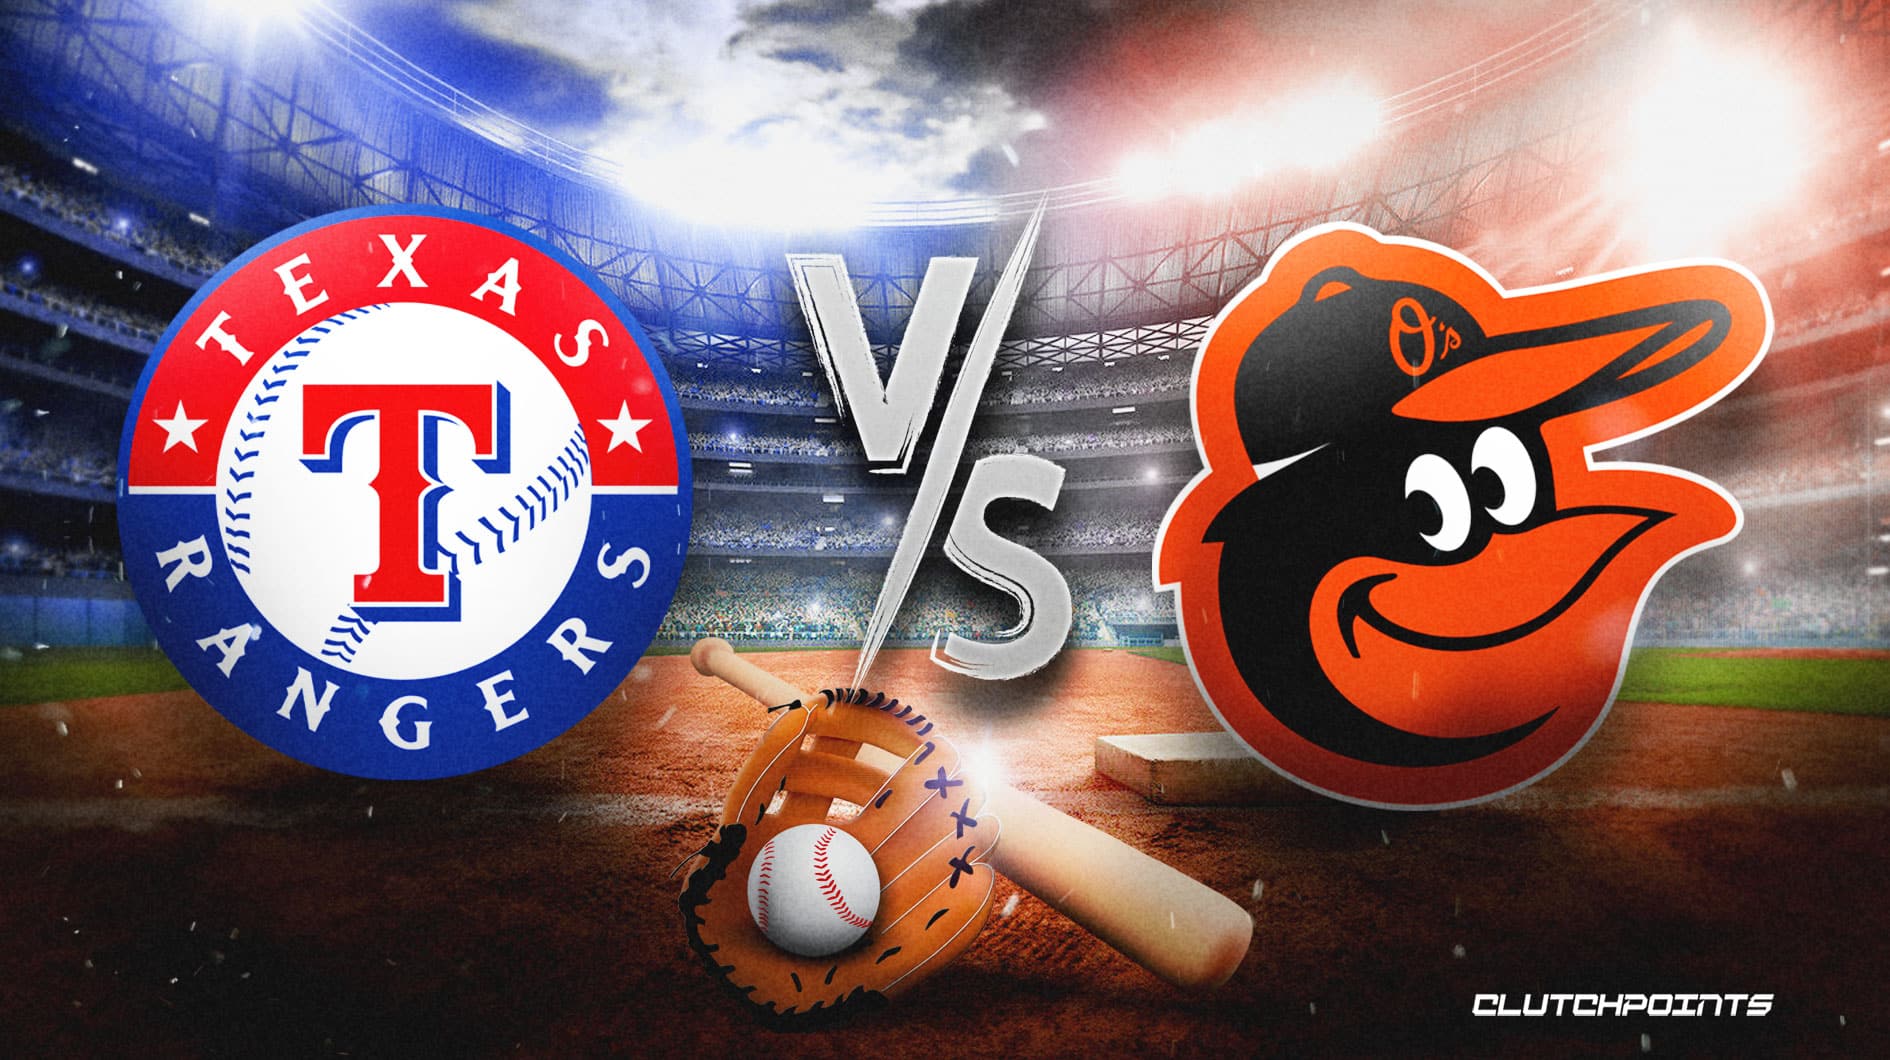 RangersOrioles prediction, odds, pick, how to watch